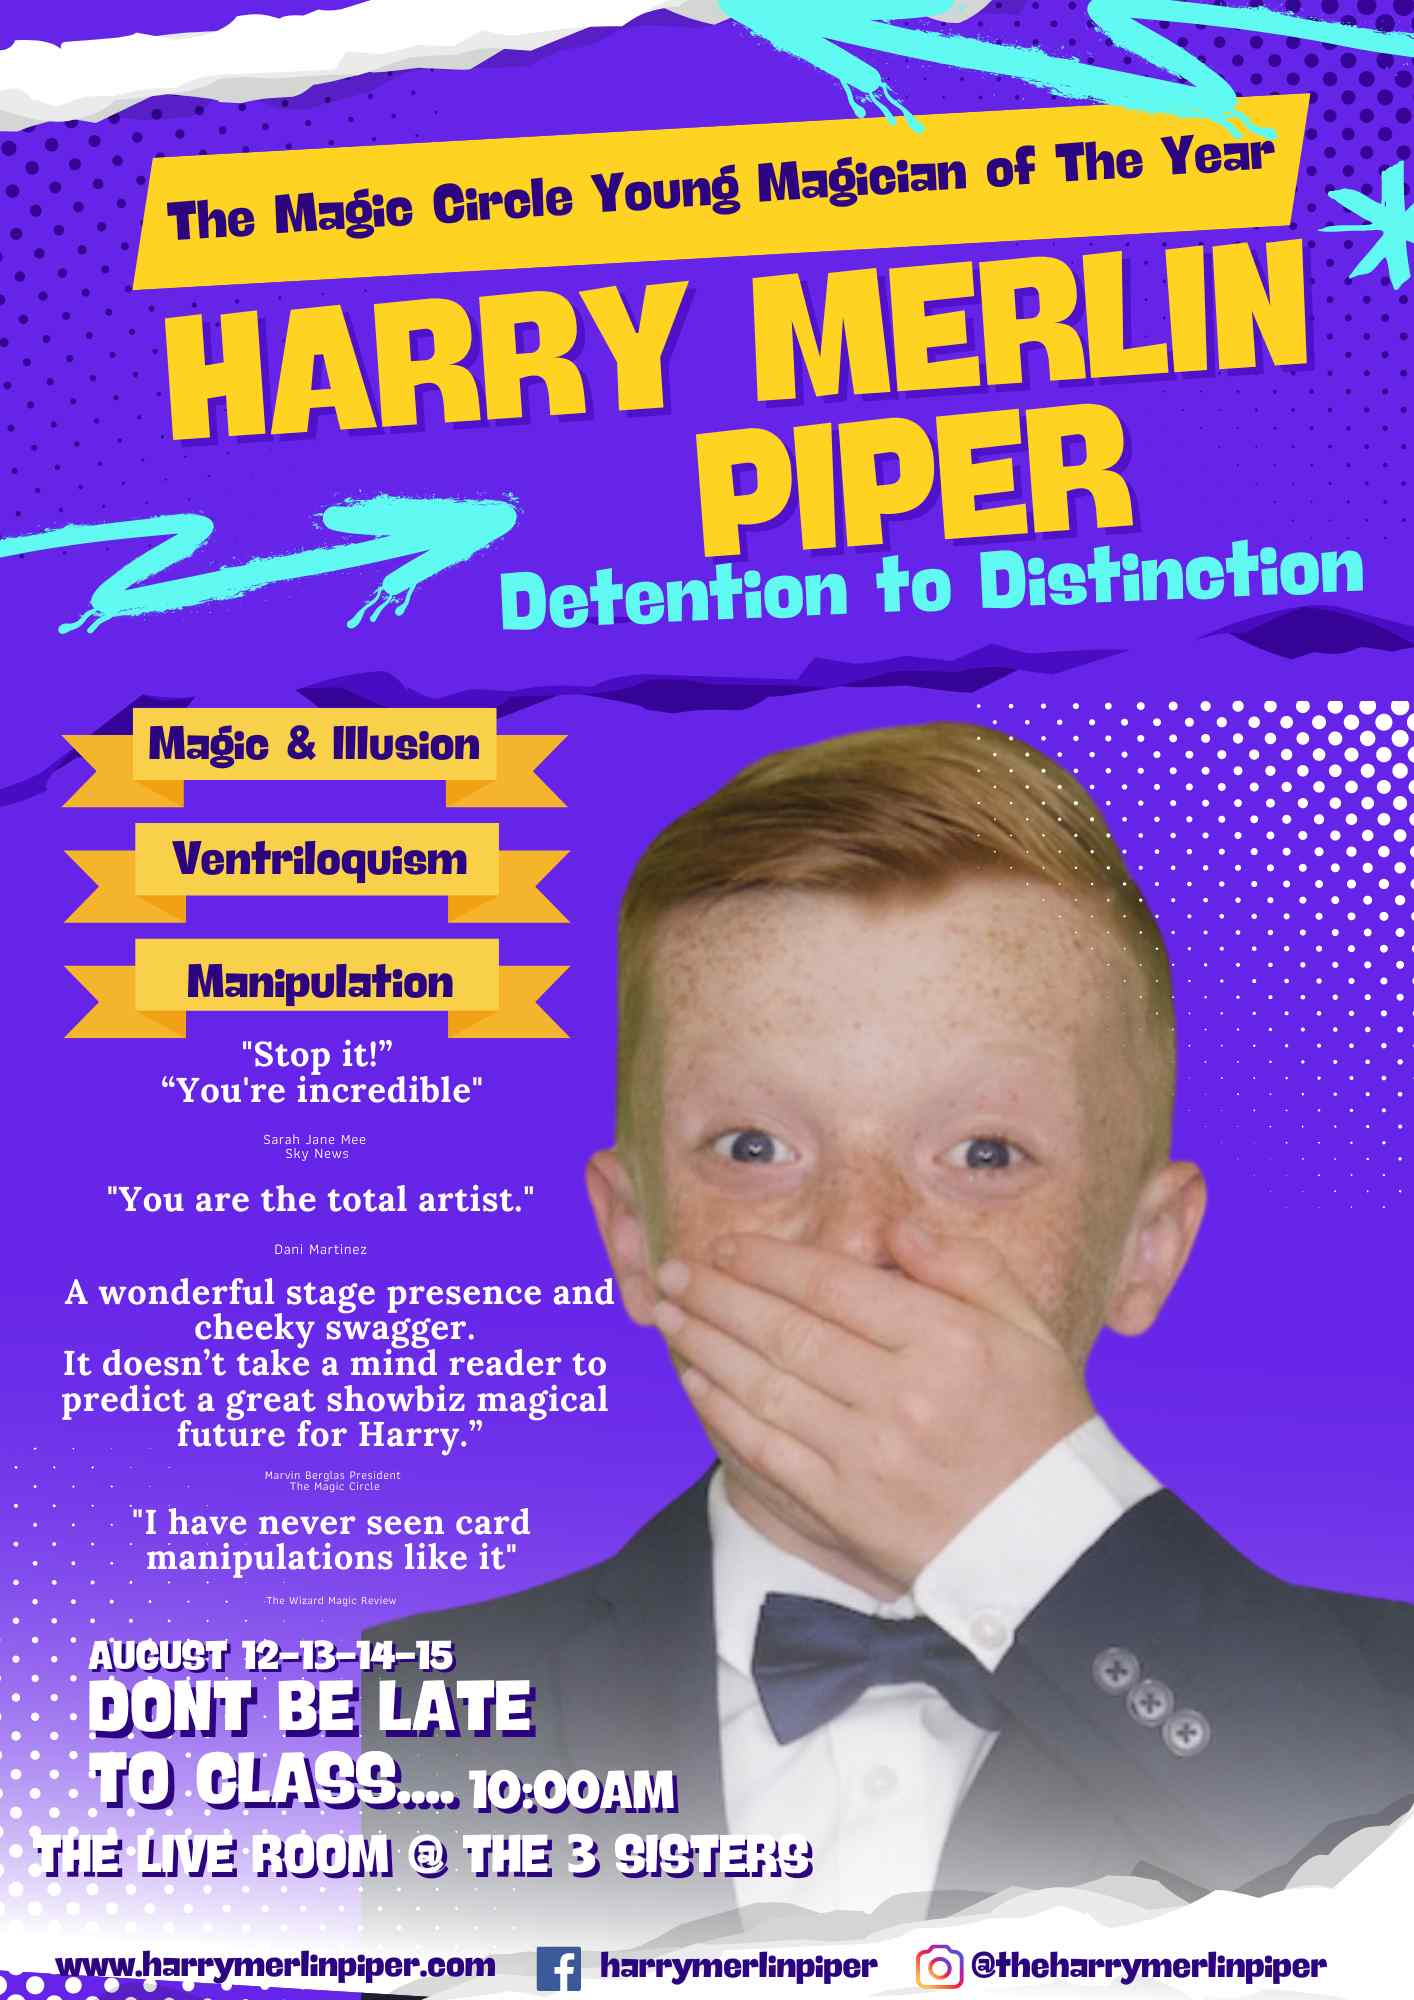 Detention to Distinction: The Magical Journey of Harry Merlin Piper